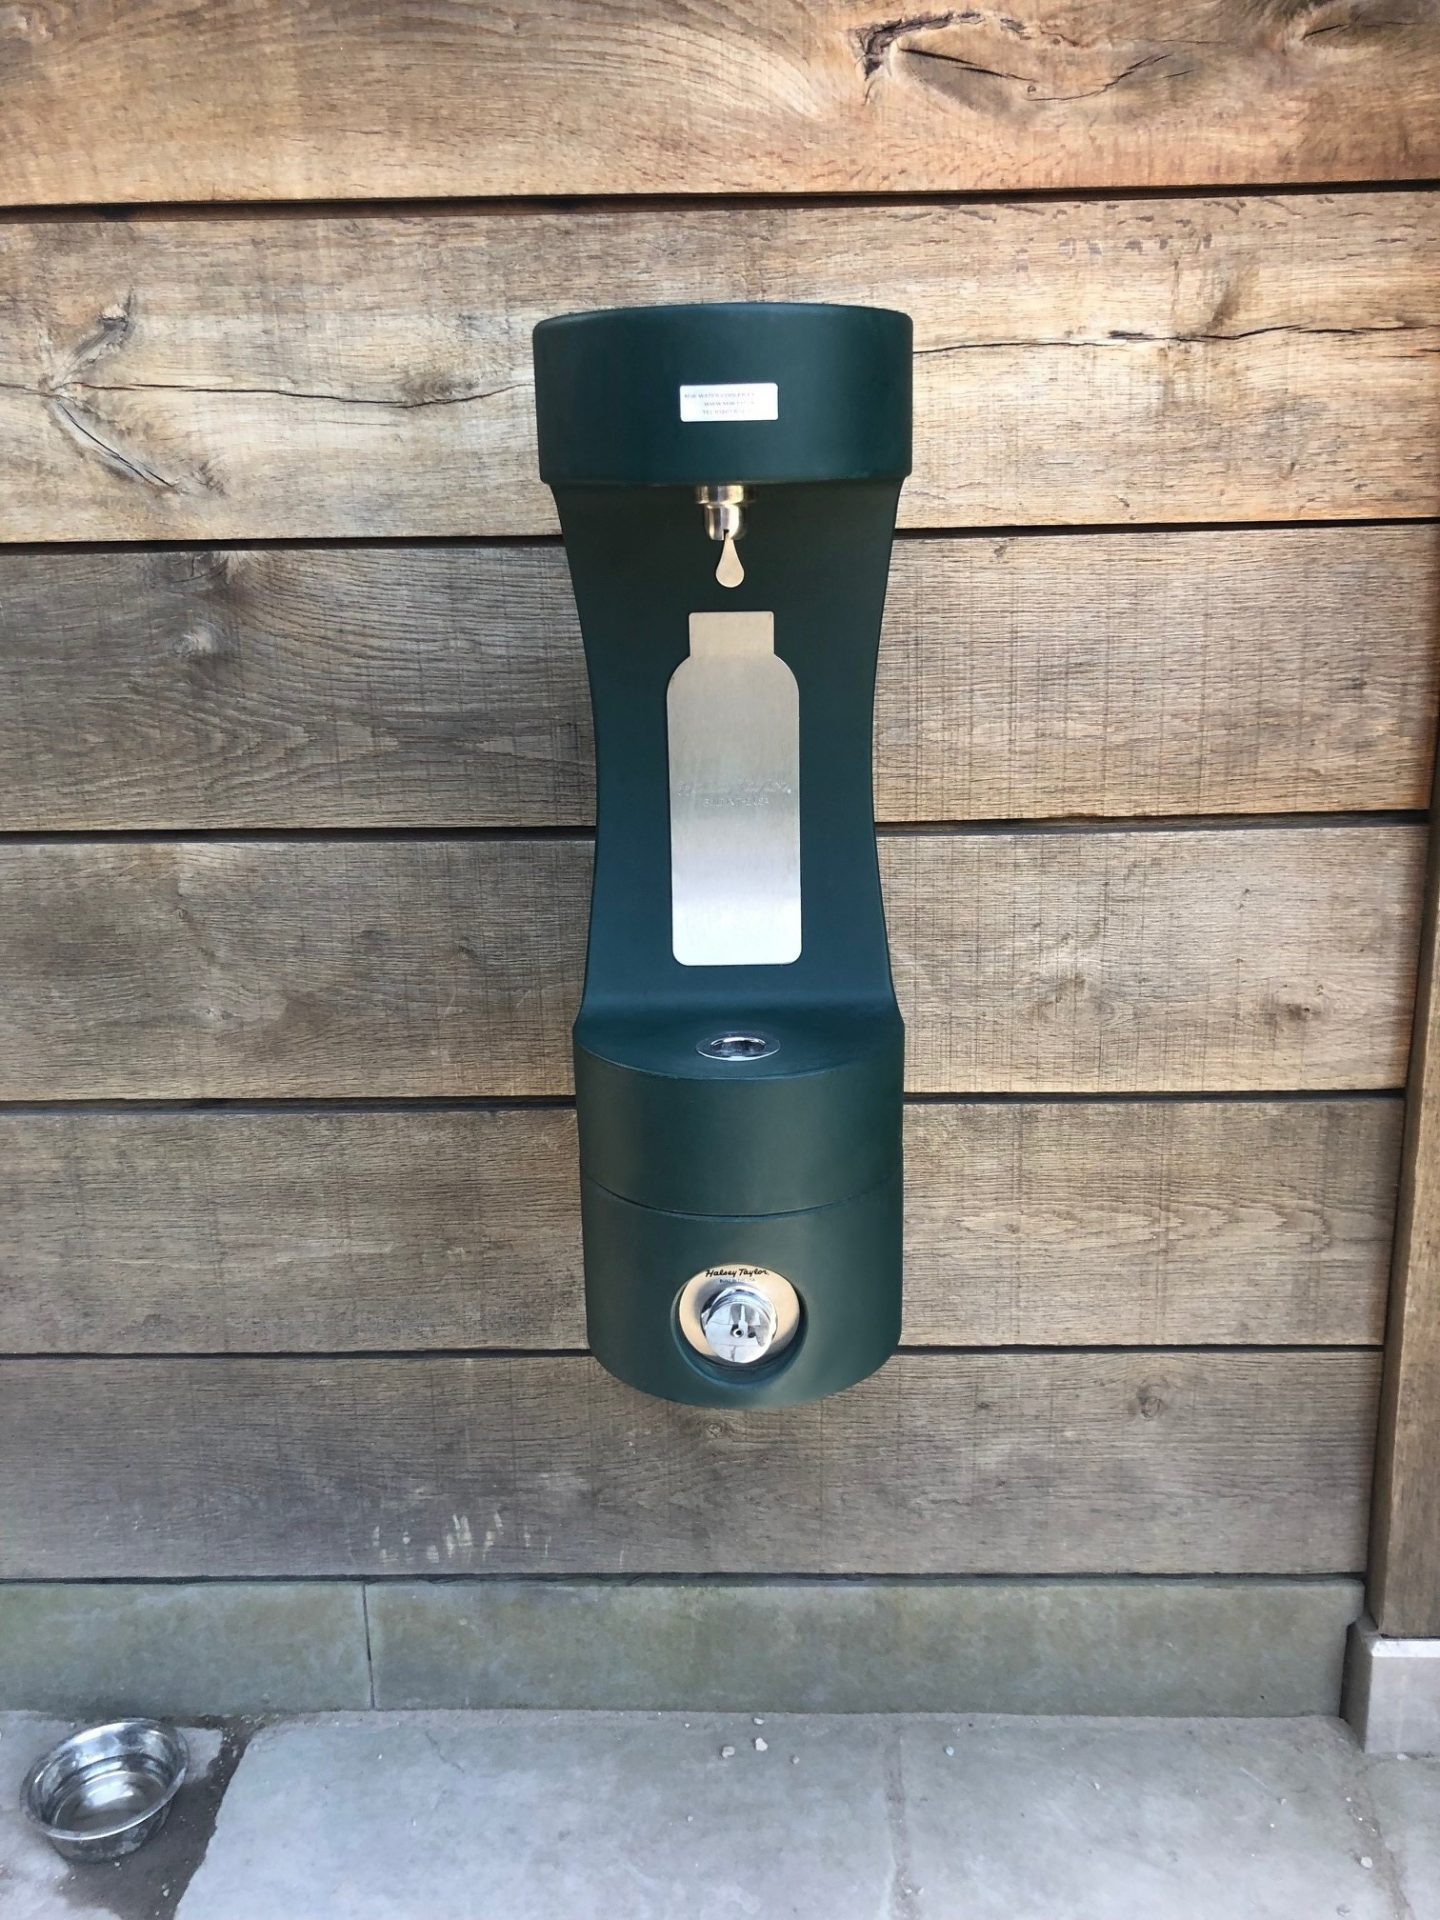 New green wall-mounted bottle filler at Caerphilly Castle